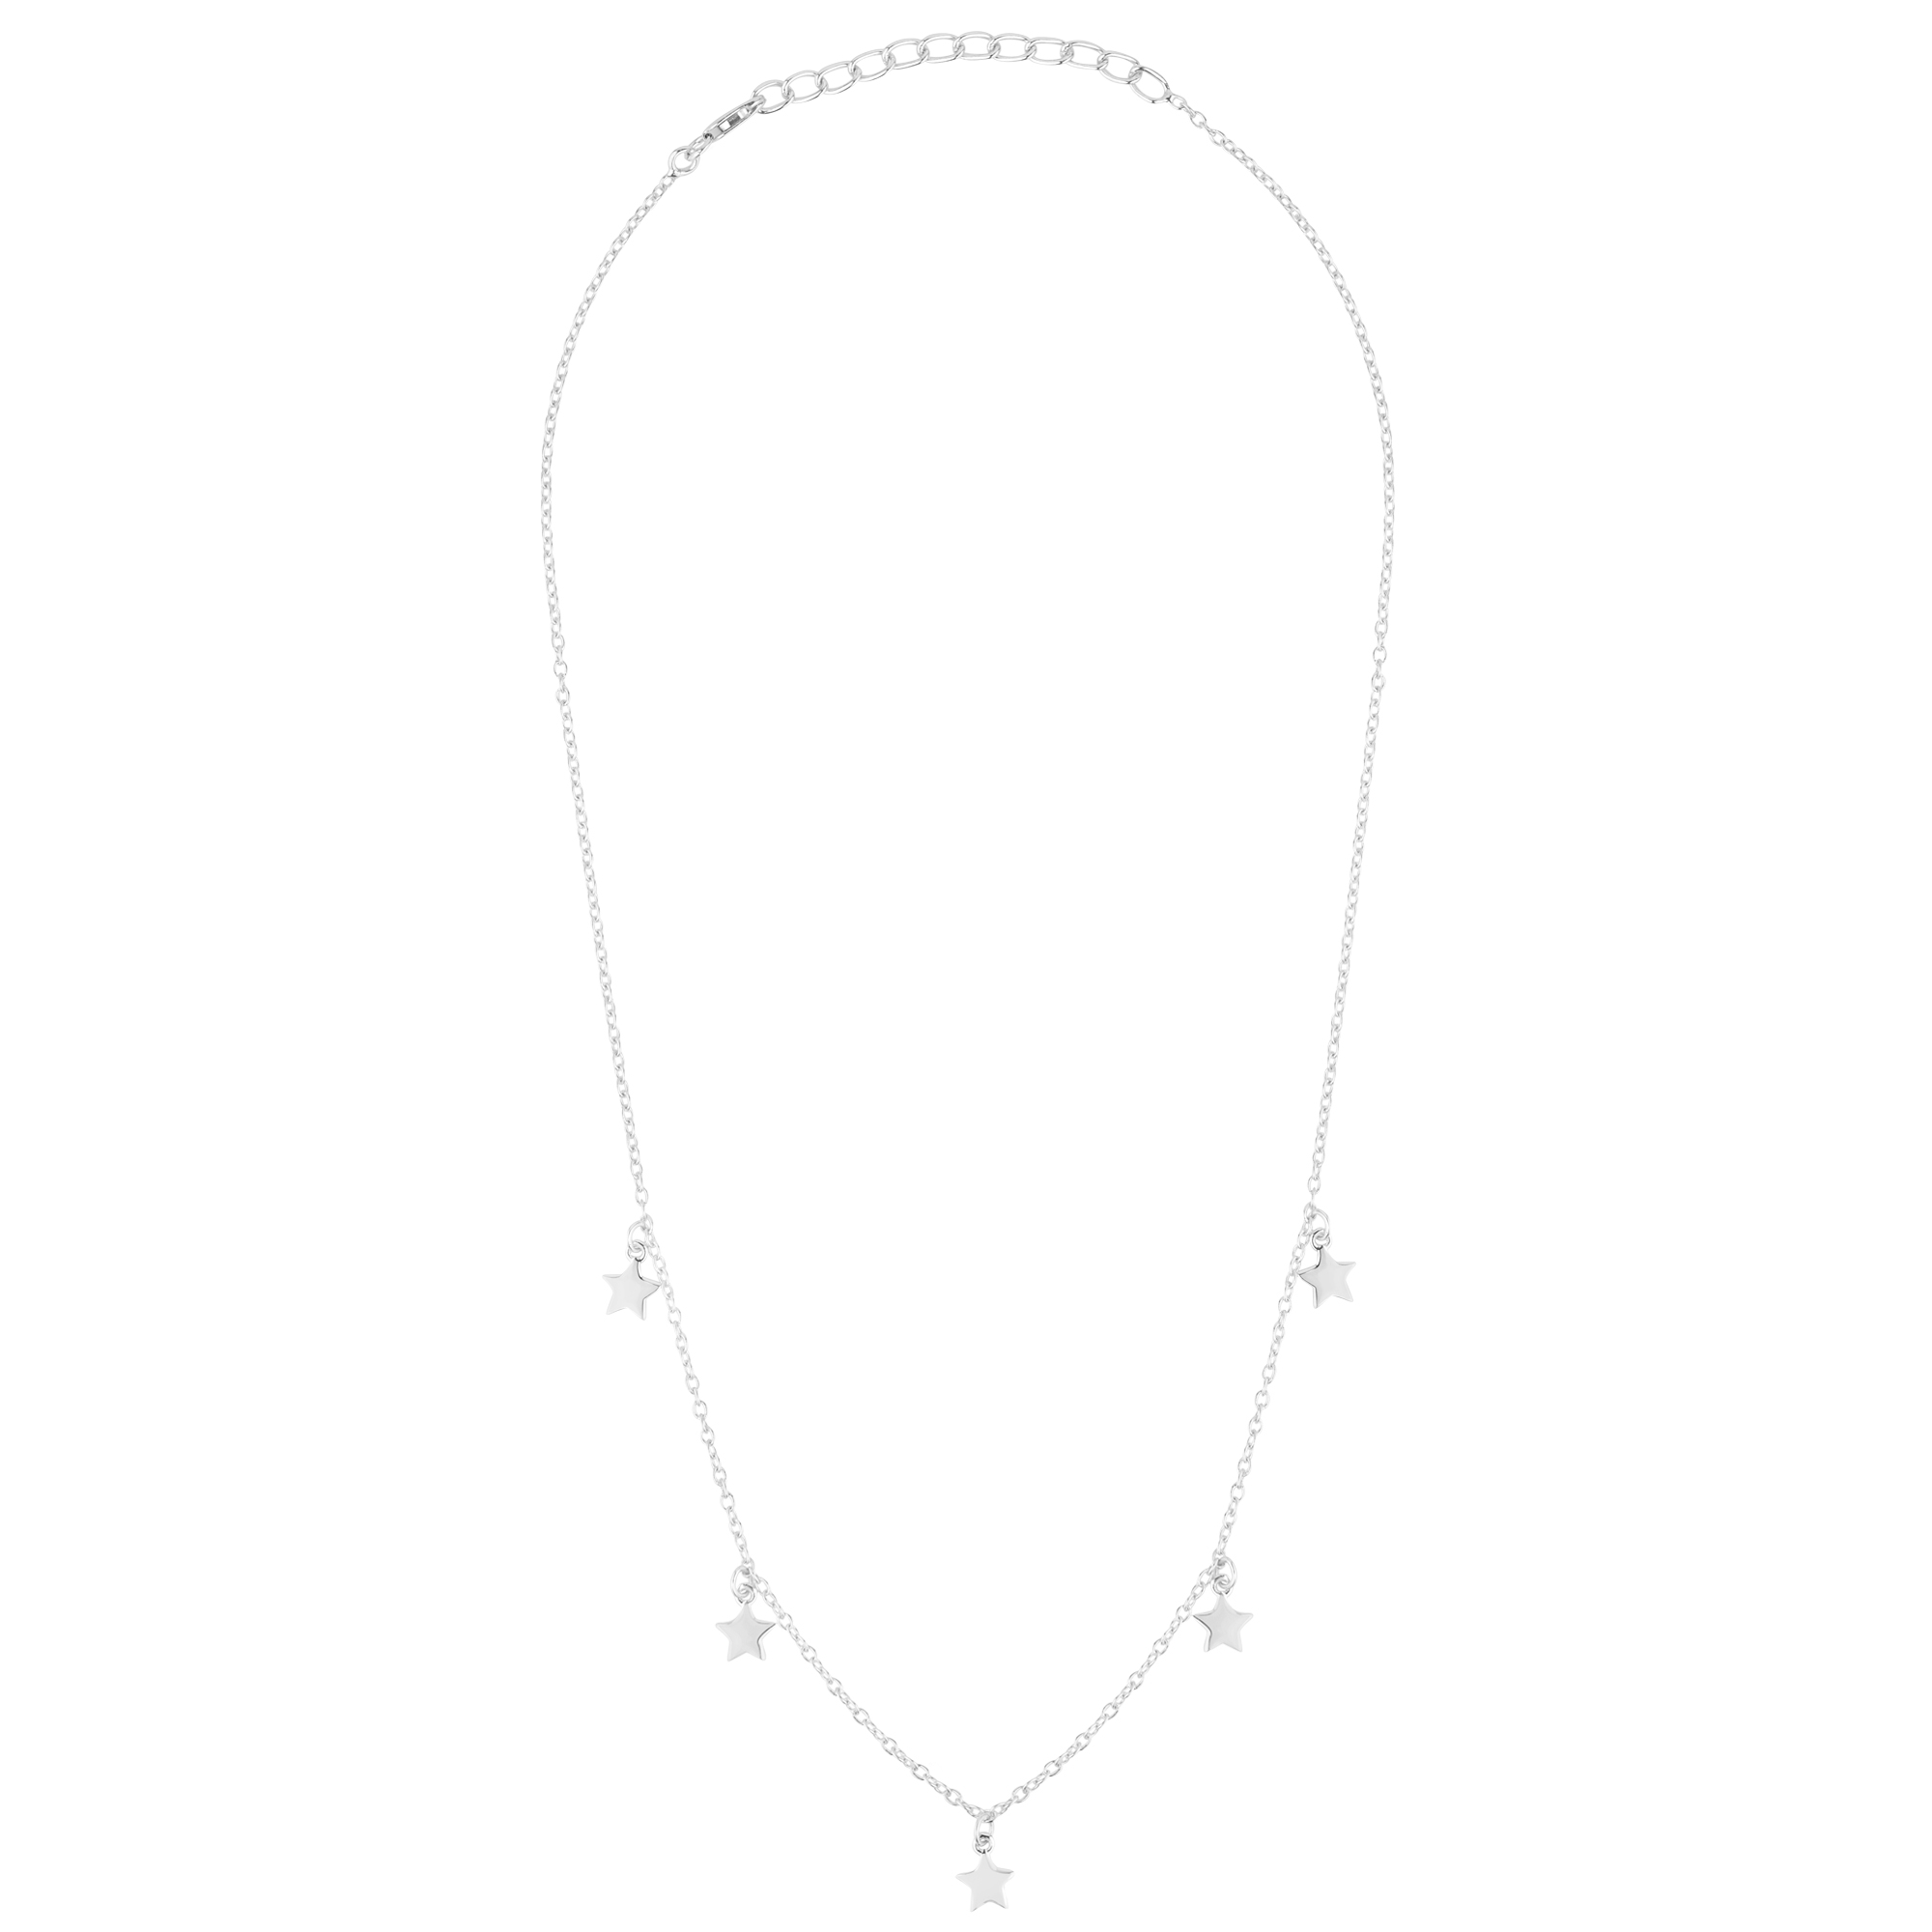 Five Star Necklace in 925 sterling silver